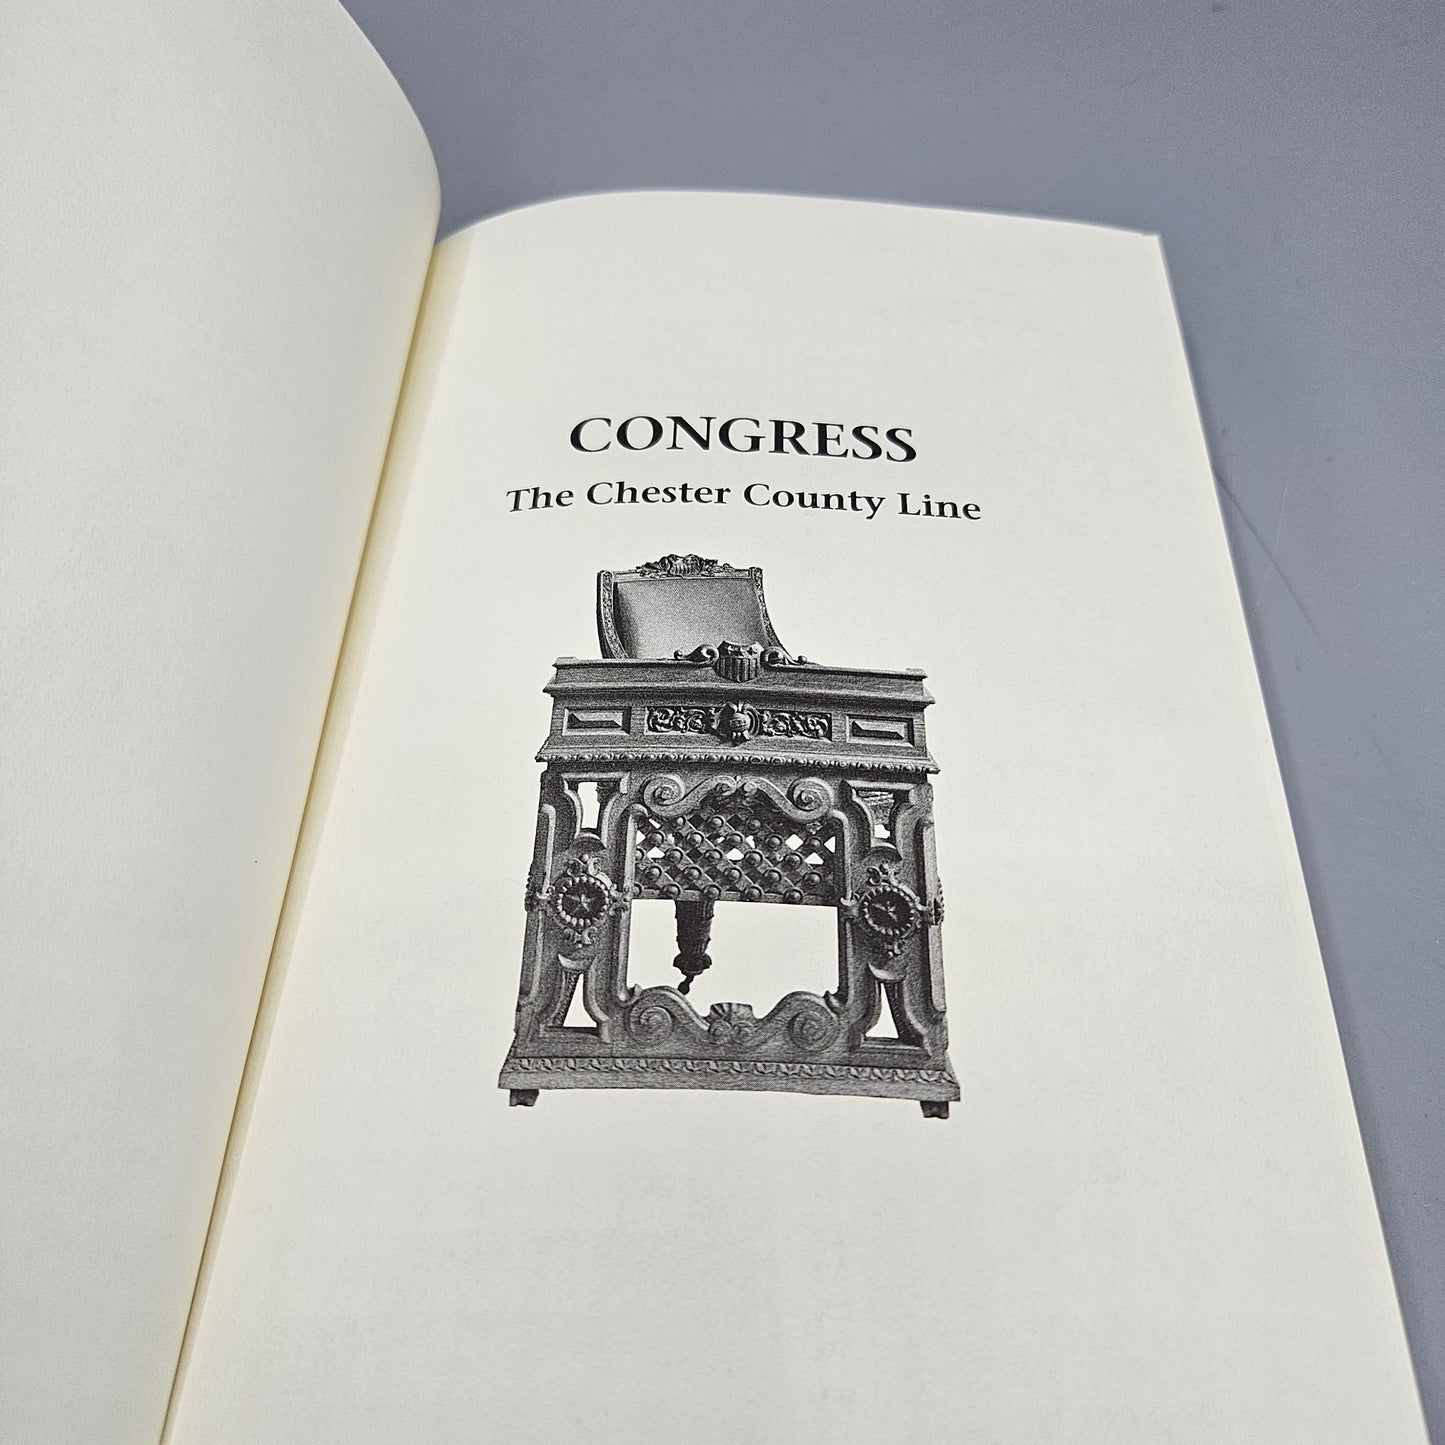 Book: Congress The Chester County Line Wayne C. Woodward Signed